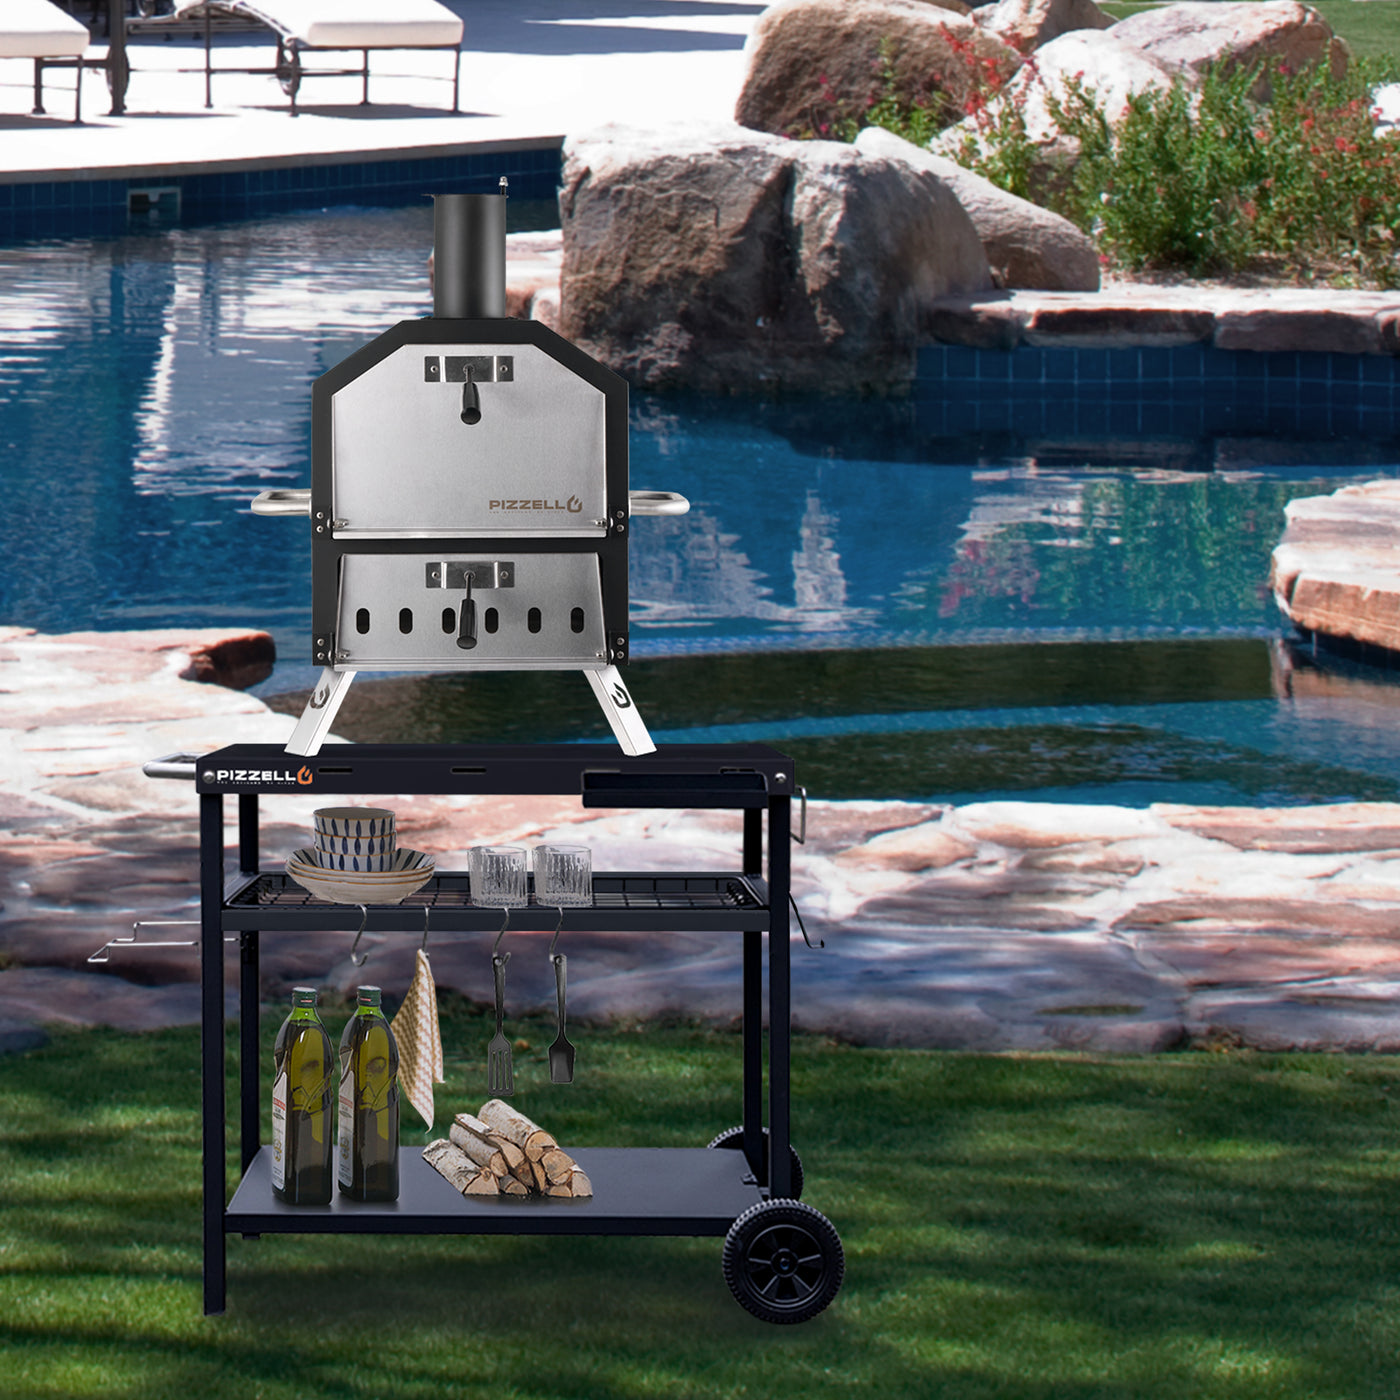 Pizzello Grande - Outdoor 2-Layer Pizza Oven with temperature control on a cart by a swimming pool.